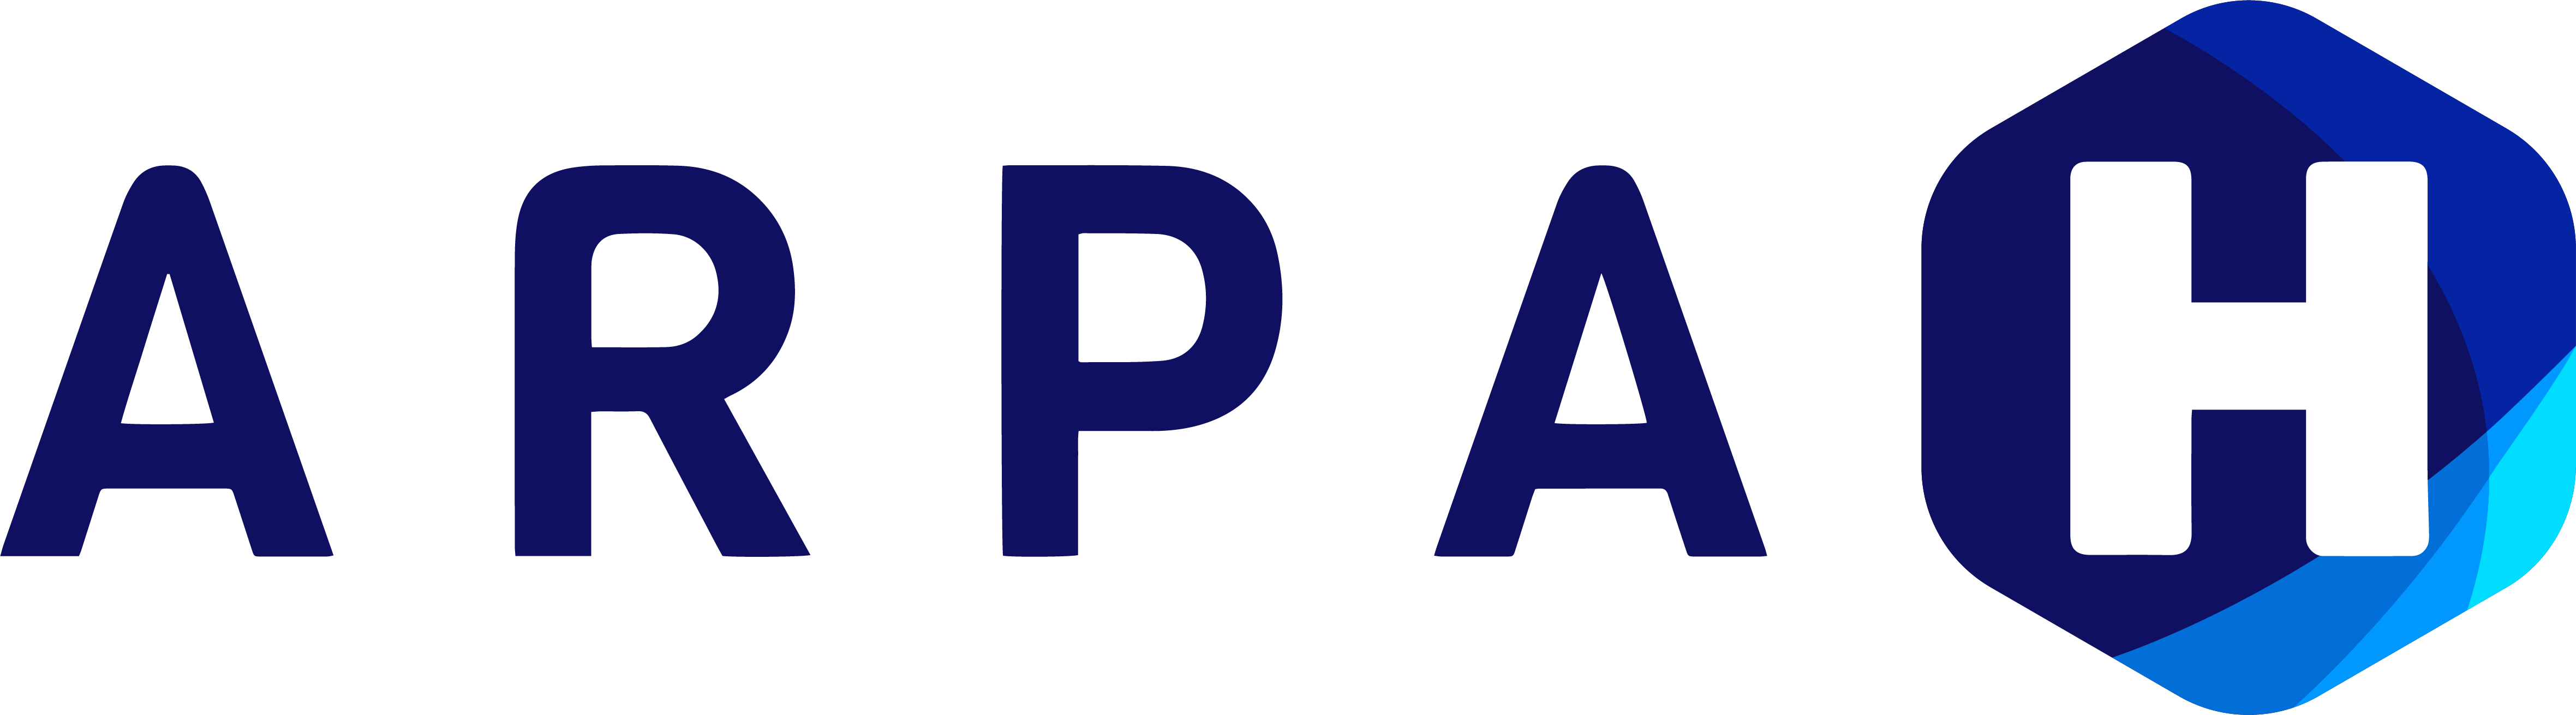 Advanced Research Projects Agency for Health (ARPA-H) logo